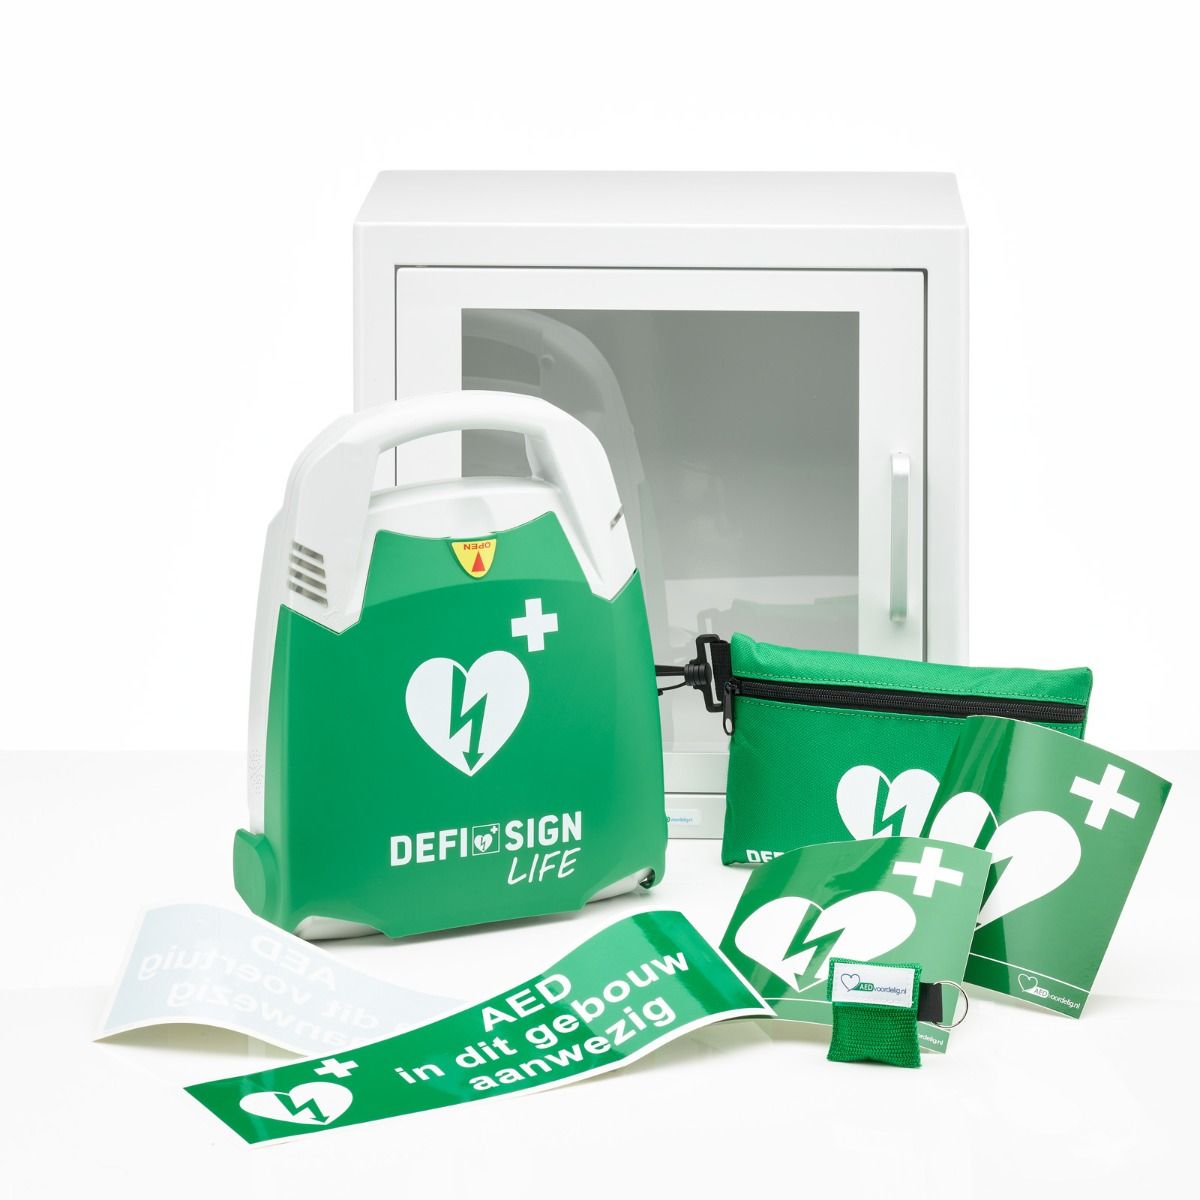 DefiSign Life AED + binnenkast-Wit-Volautomaat-NL/ENG/FR